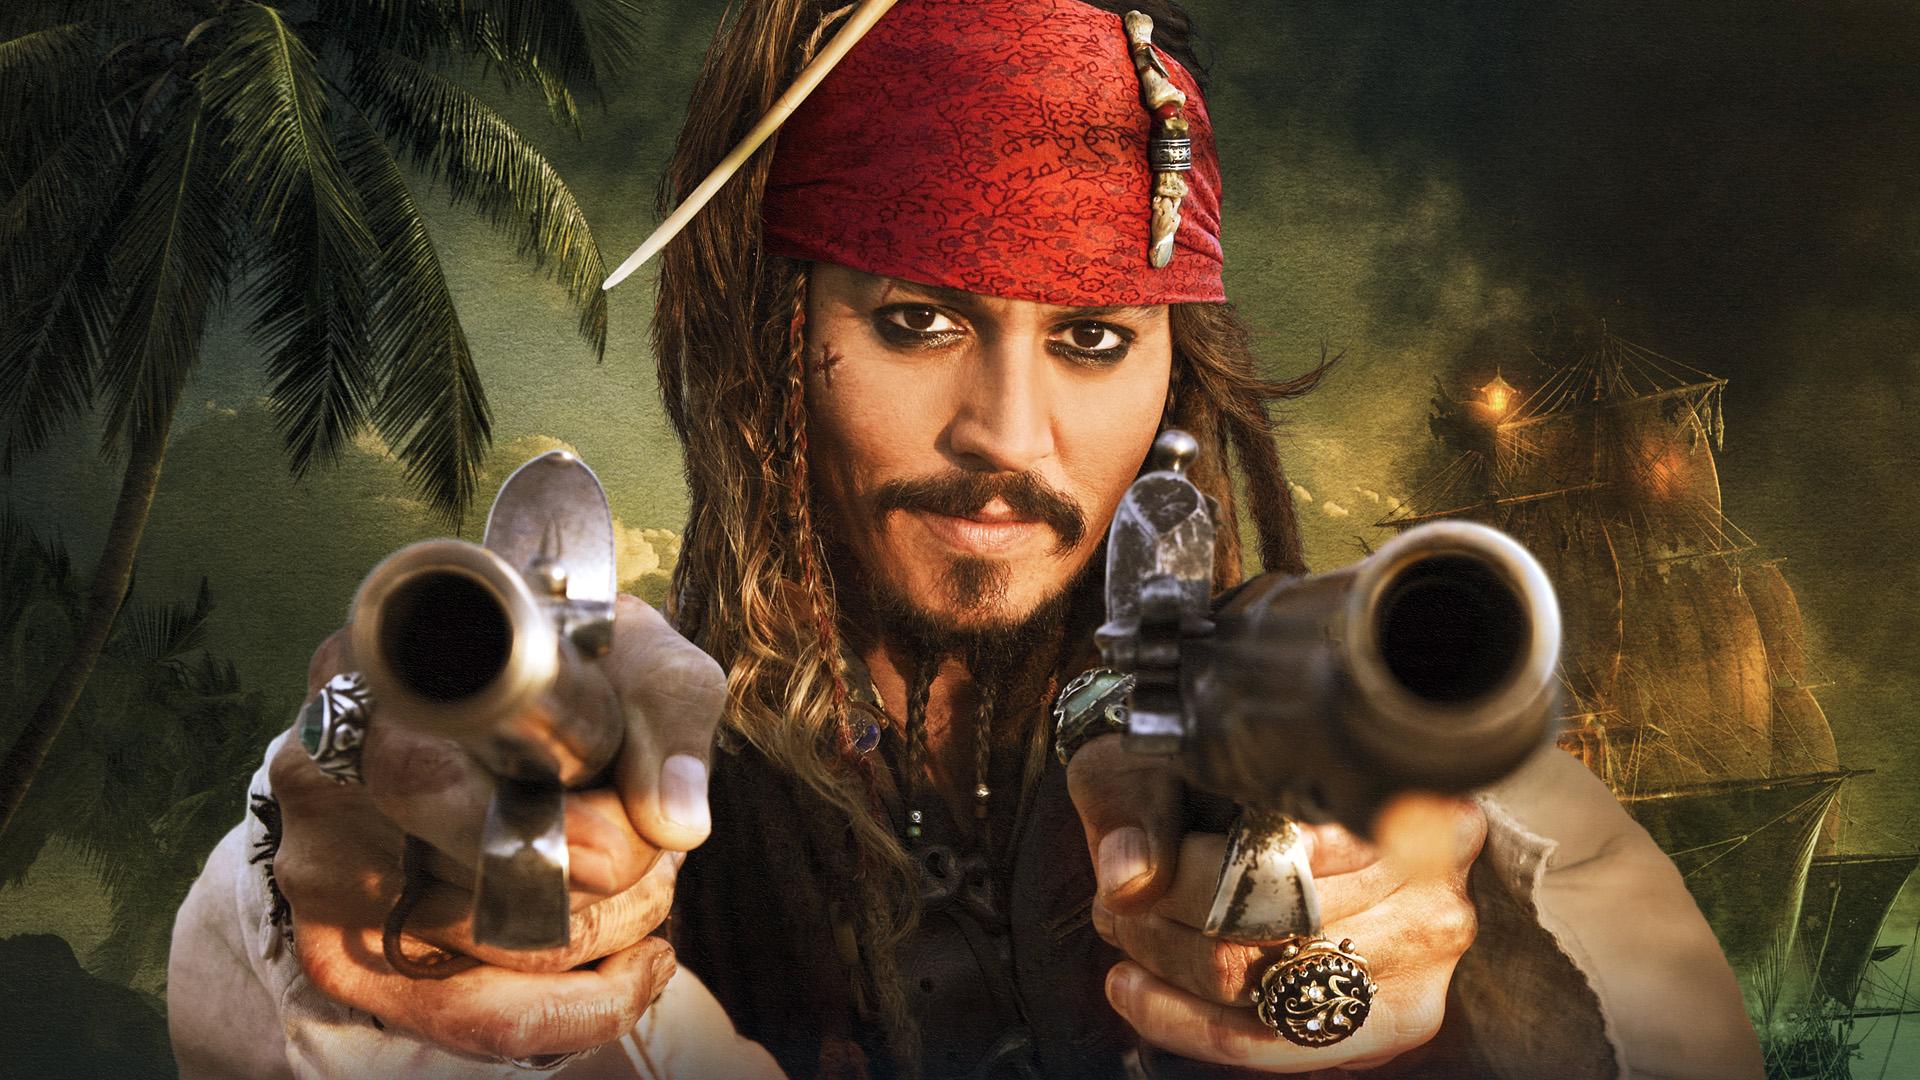 johnny depp, pirates of the caribbean: on stranger tides, jack sparrow, pirates of the caribbean, movie